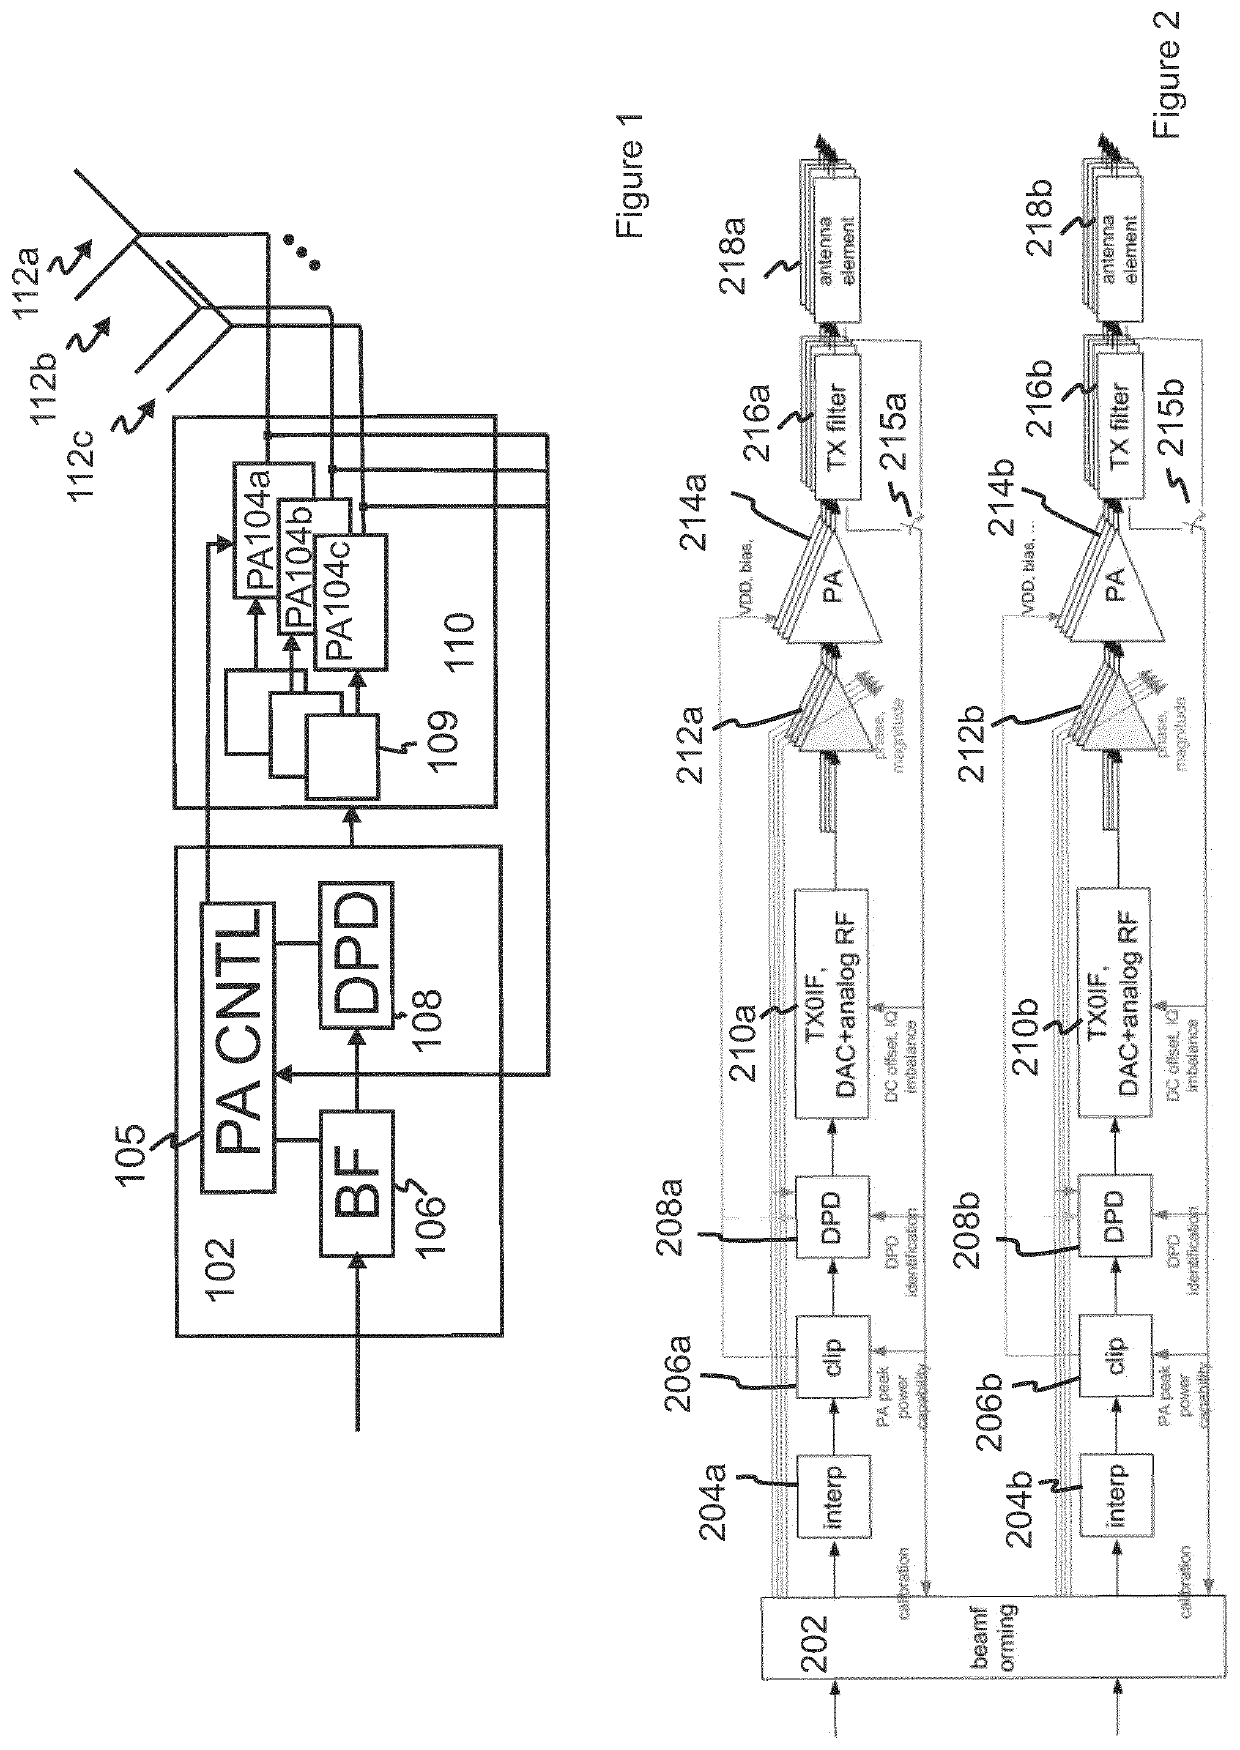 Linearizing Power Amplifiers' Outputs in Multi-Antenna System